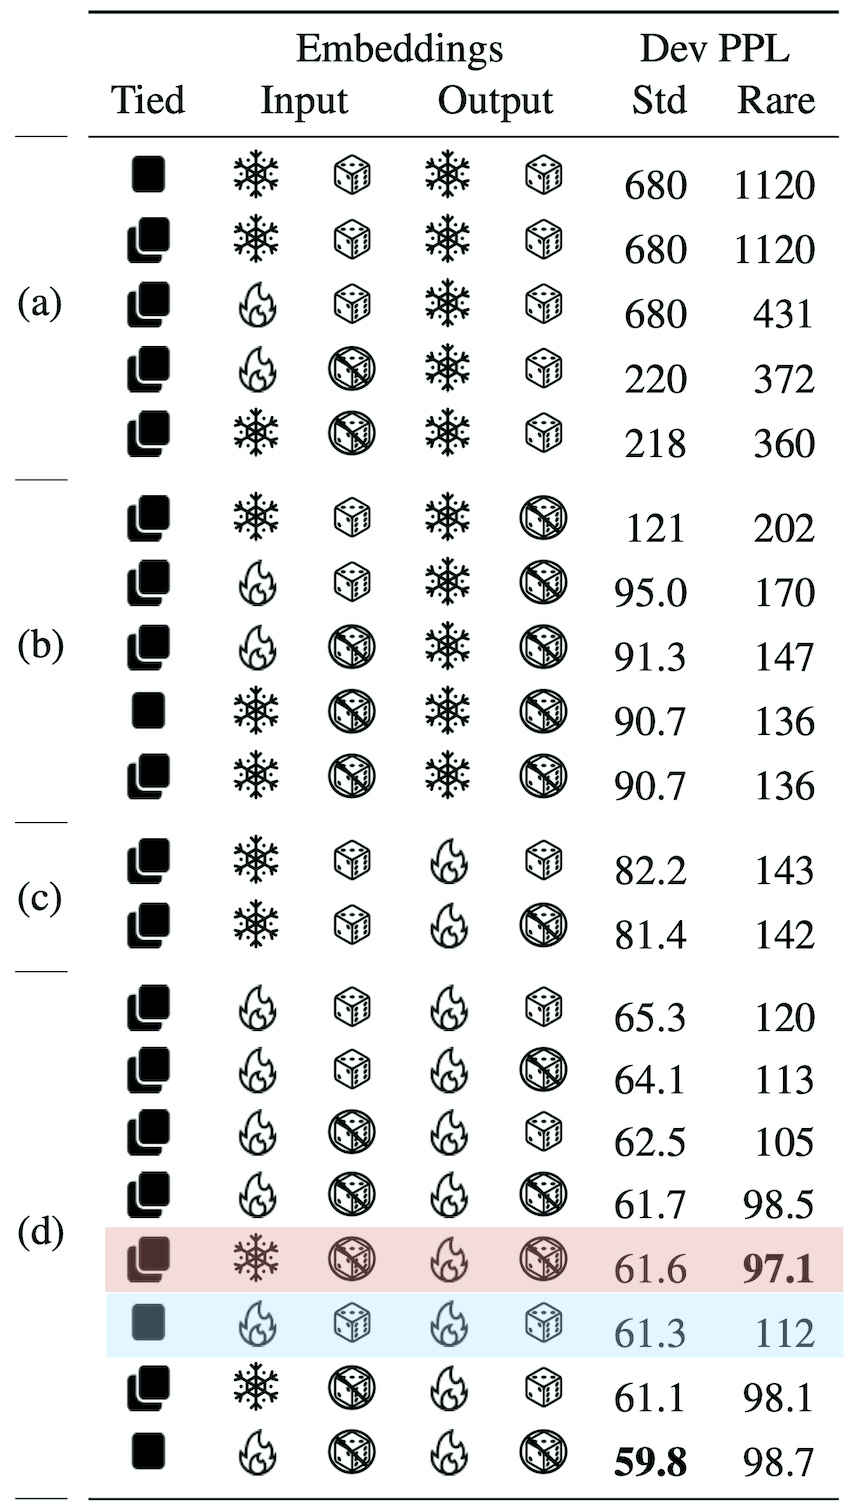 Variations on LM (for written form of table see bottom of page)